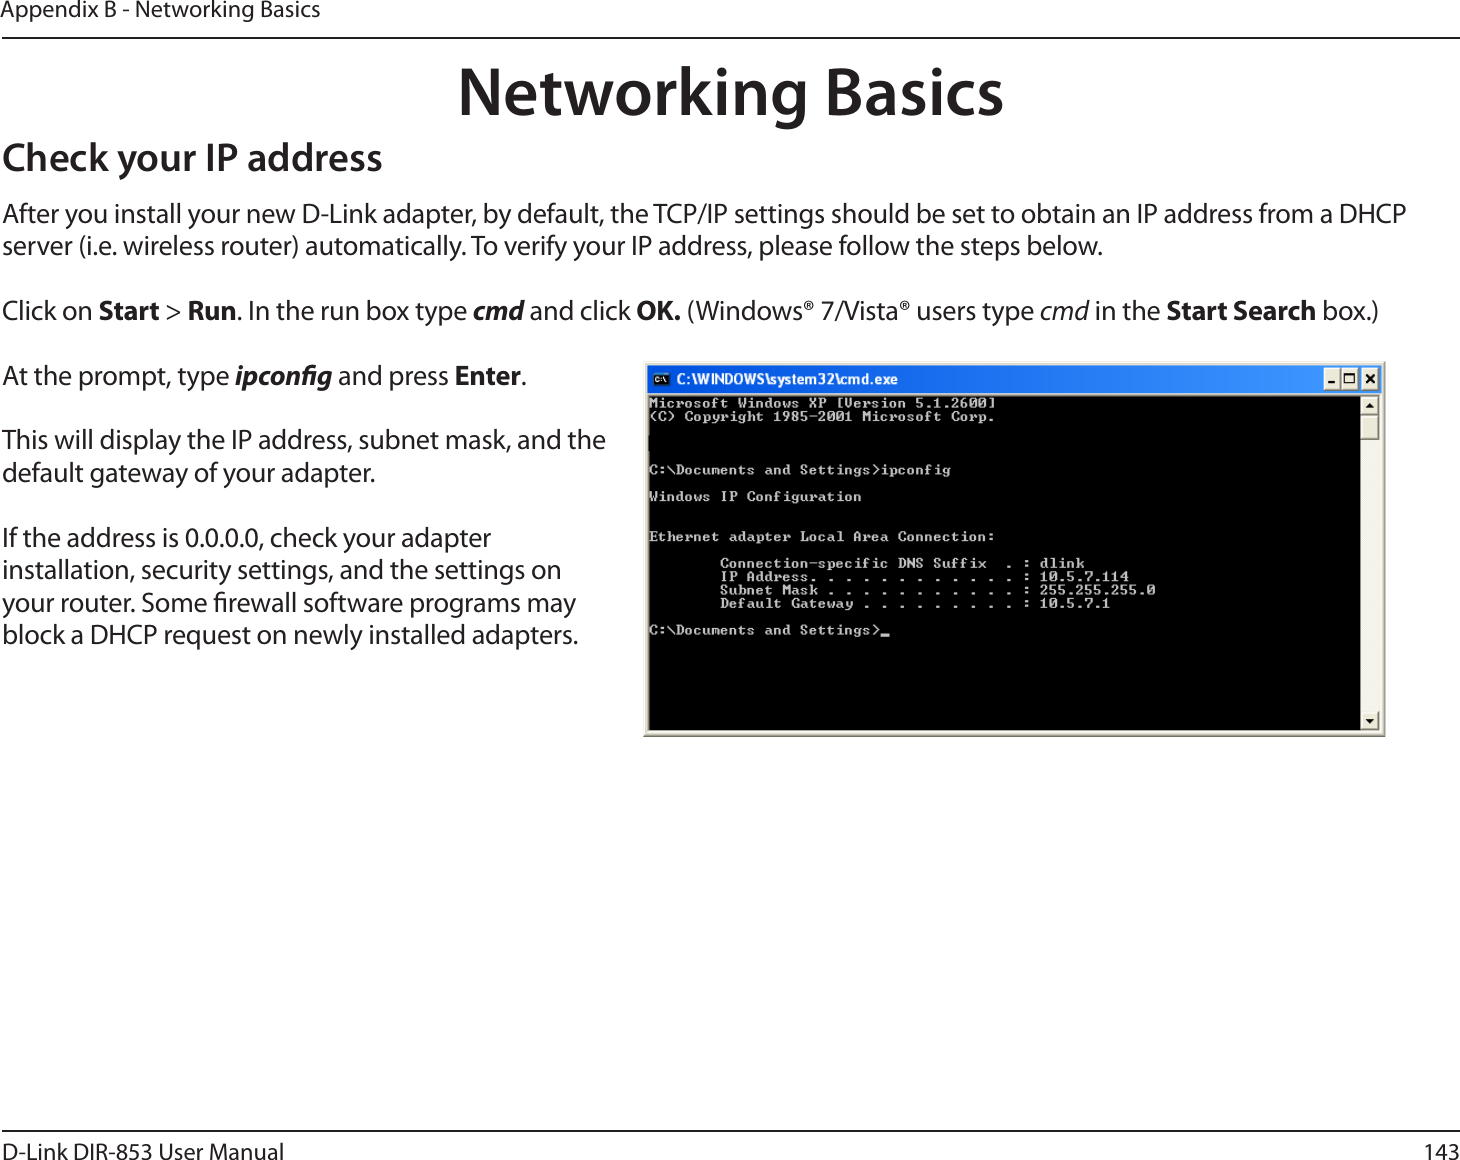 143D-Link DIR-853 User ManualAppendix B - Networking BasicsNetworking BasicsCheck your IP addressAfter you install your new D-Link adapter, by default, the TCP/IP settings should be set to obtain an IP address from a DHCP server (i.e. wireless router) automatically. To verify your IP address, please follow the steps below.Click on Start &gt; Run. In the run box type cmd and click OK. (Windows® 7/Vista® users type cmd in the Start Search box.)At the prompt, type ipcong and press Enter.This will display the IP address, subnet mask, and the default gateway of your adapter.If the address is 0.0.0.0, check your adapter installation, security settings, and the settings on your router. Some rewall software programs may block a DHCP request on newly installed adapters. 